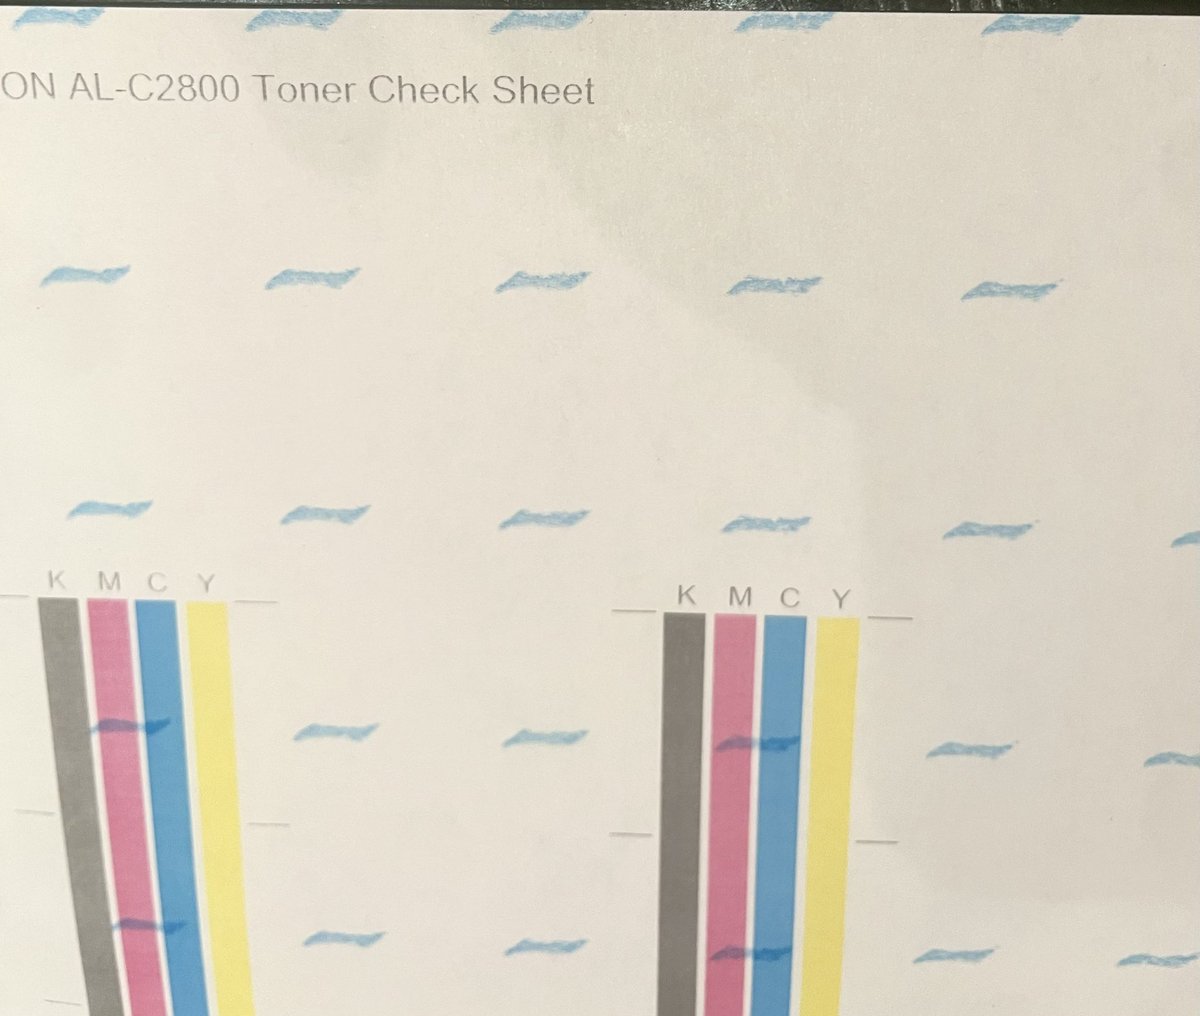 Epson being singularly useless here. Their only suggestion is I buy a new colour laser printer! I have a printing issue after installing a new cyan toner cartridge. Blue waves! See below. Cost aside it’s a fabulous waste of resources. The printer works. Can anyone help.